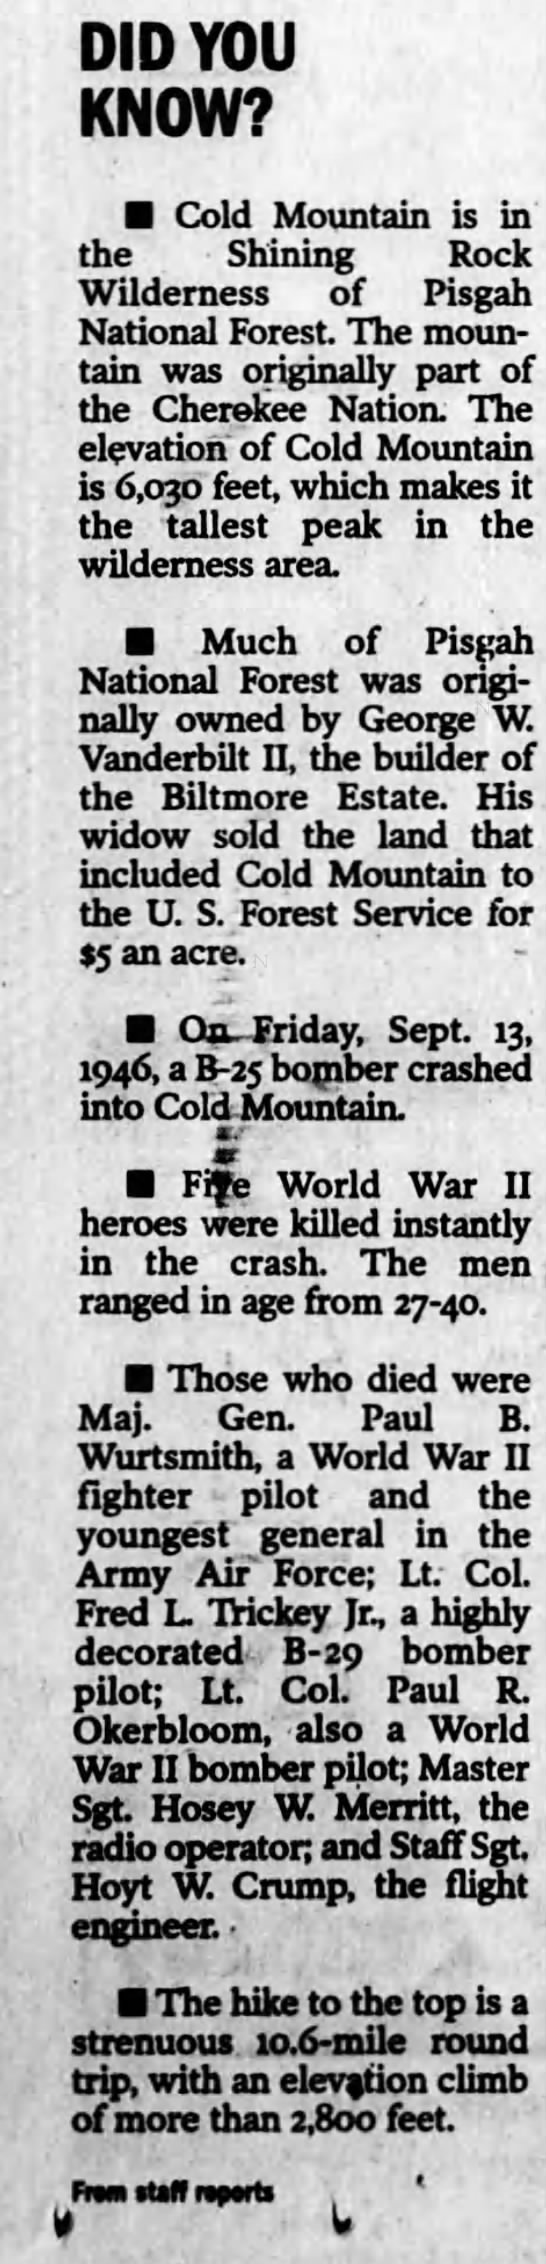 Did you Know?
Cold Mountain and B-25 Bomber crash - 